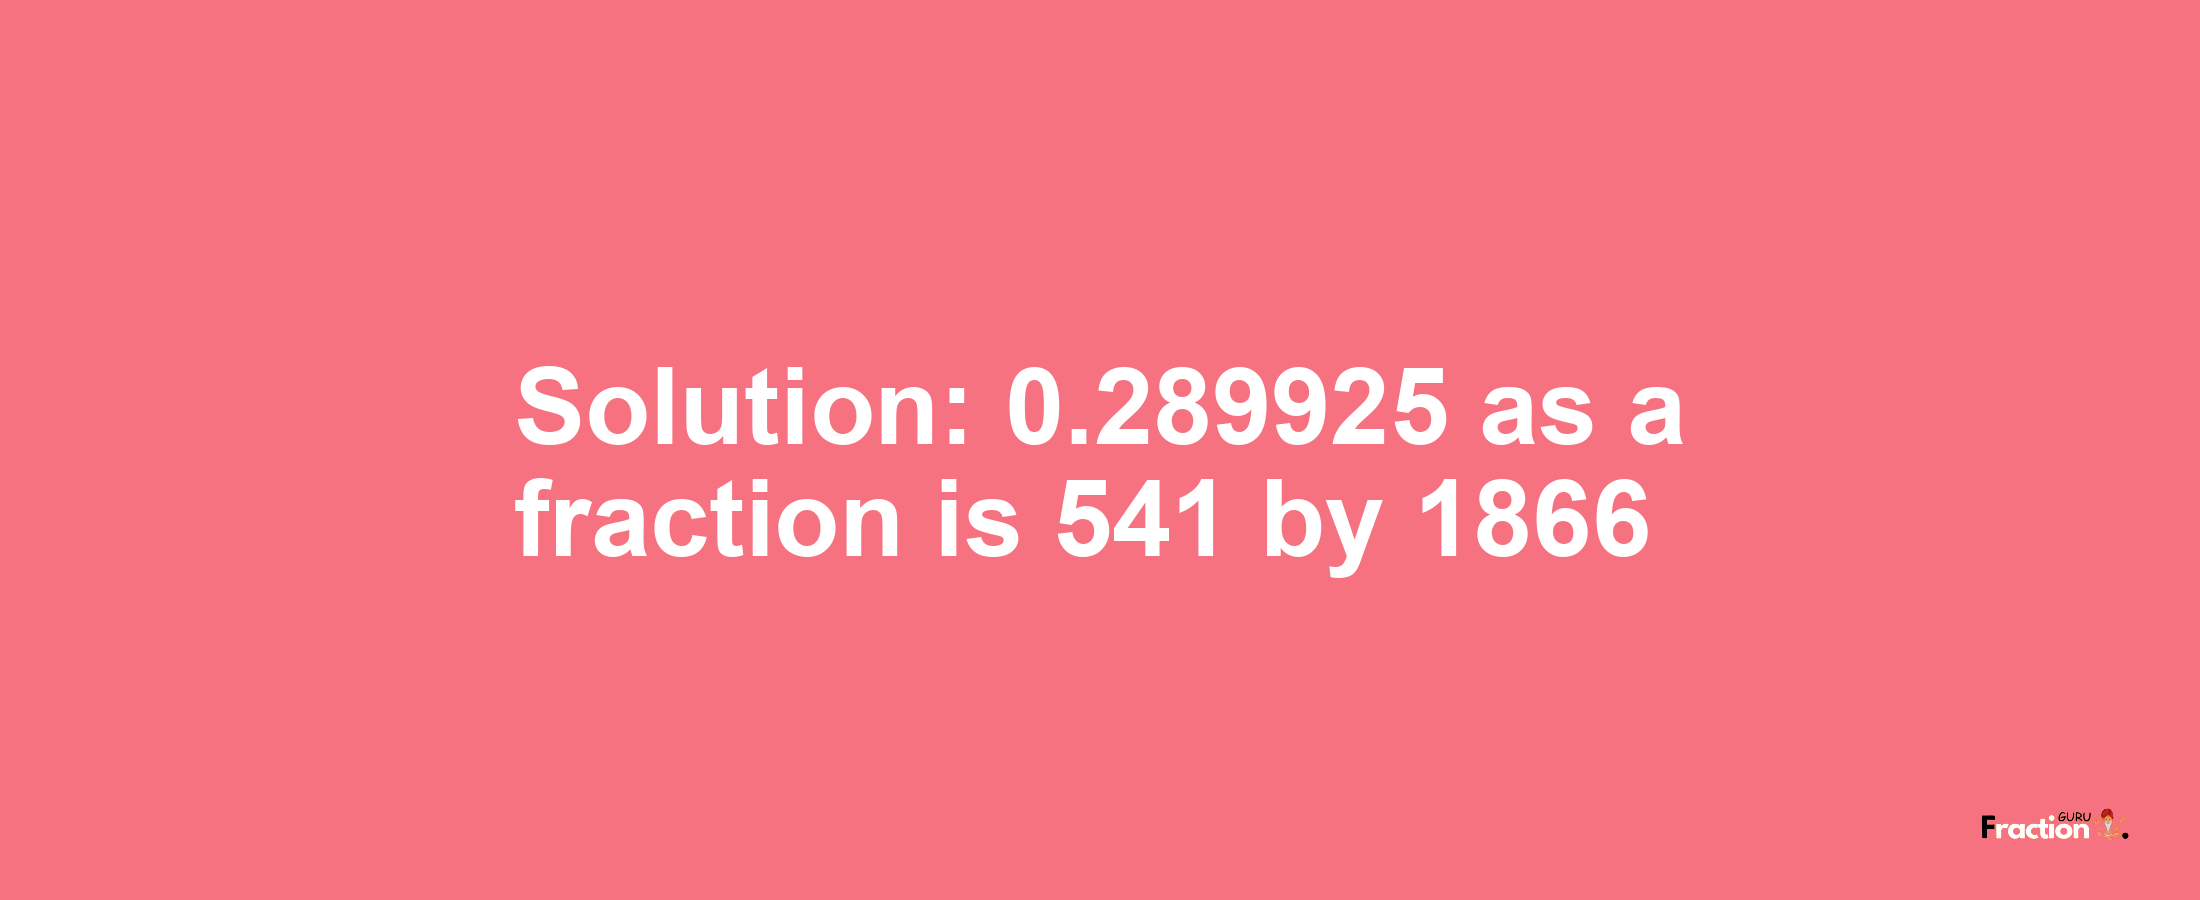 Solution:0.289925 as a fraction is 541/1866